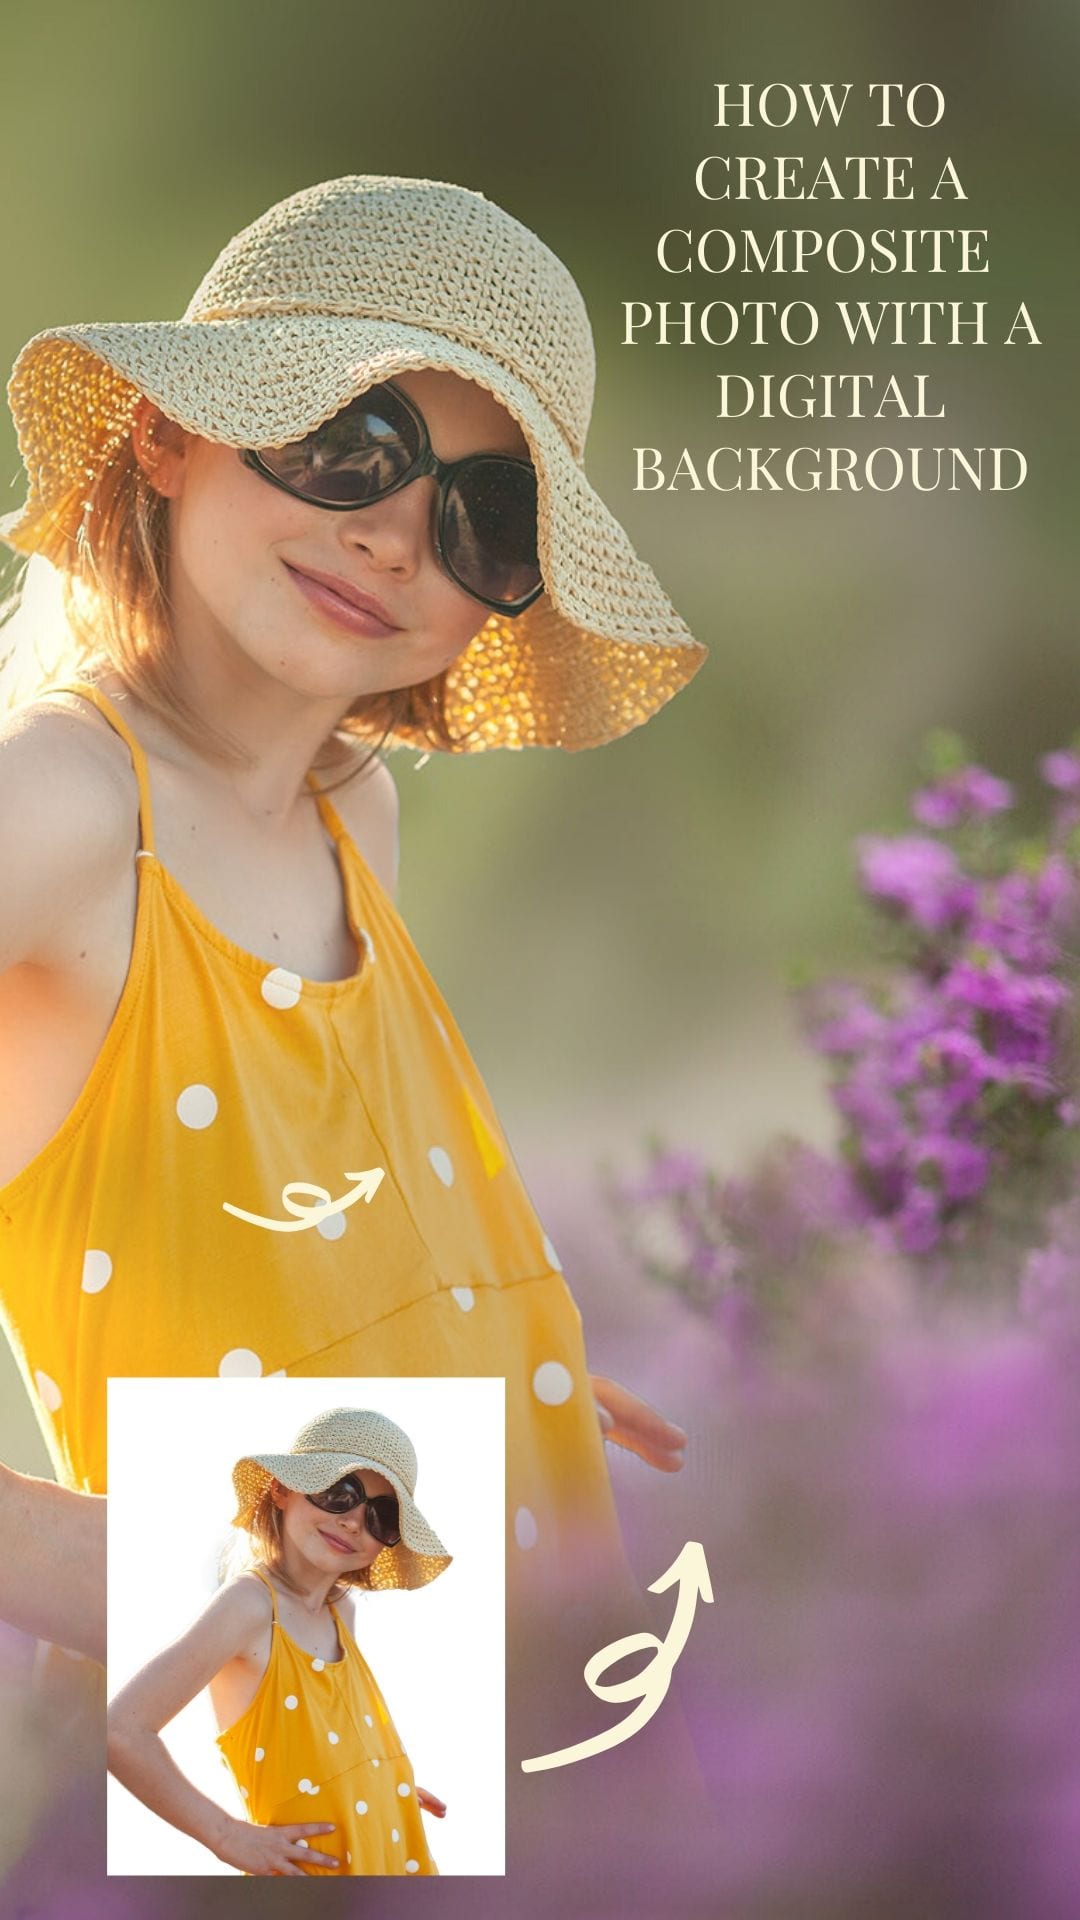 How to use a digital background in composite photography.   Photoshop tips to learn how to cut out images and place in a digital background the easy way!